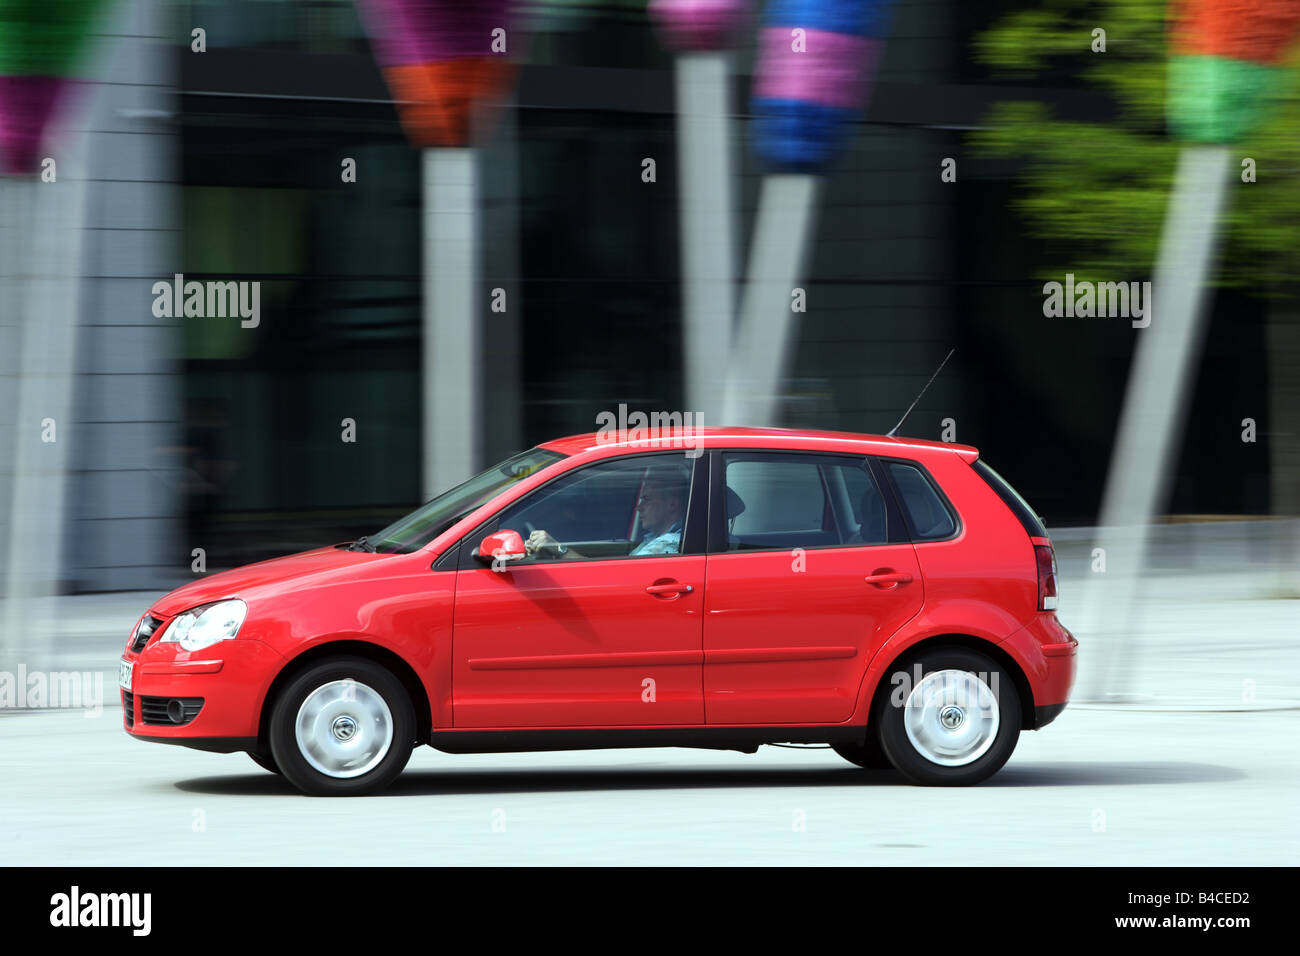 Car, VW Volkswagen Polo 1.4 TDI, model year 2005-, red, driving, side view,  City, photographer: Achim Hartmann Stock Photo - Alamy